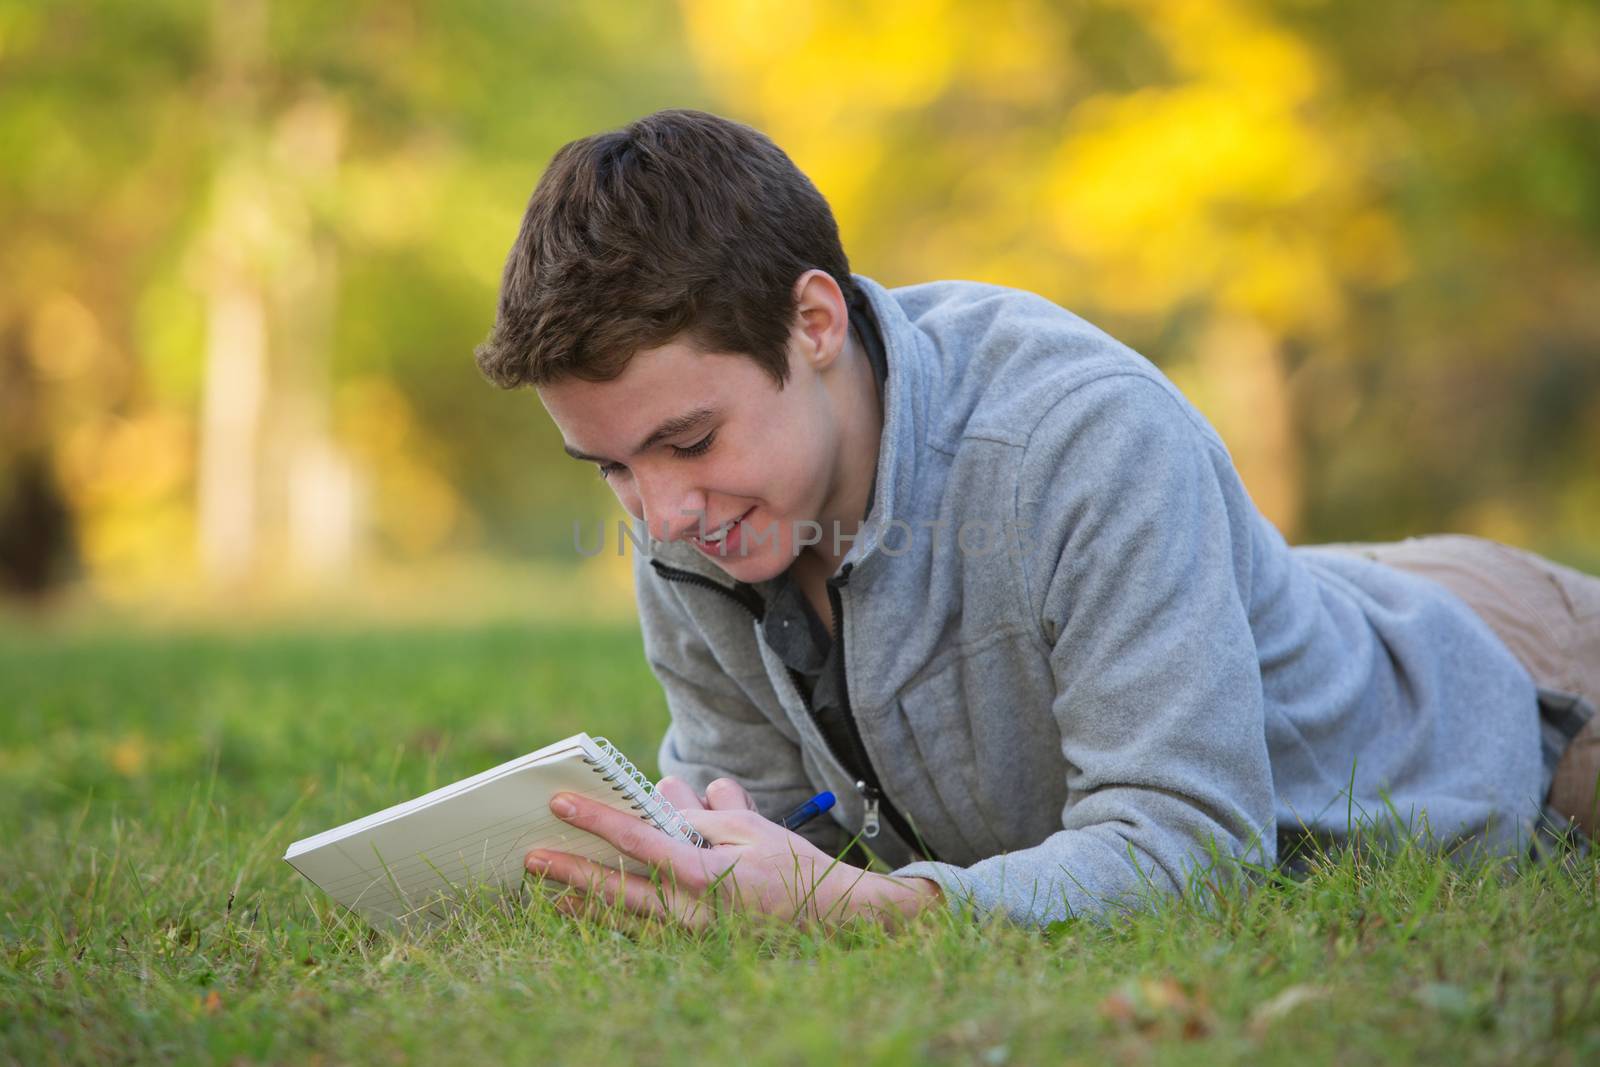 Smiling Caucasian teenager laying down on grass doing homework